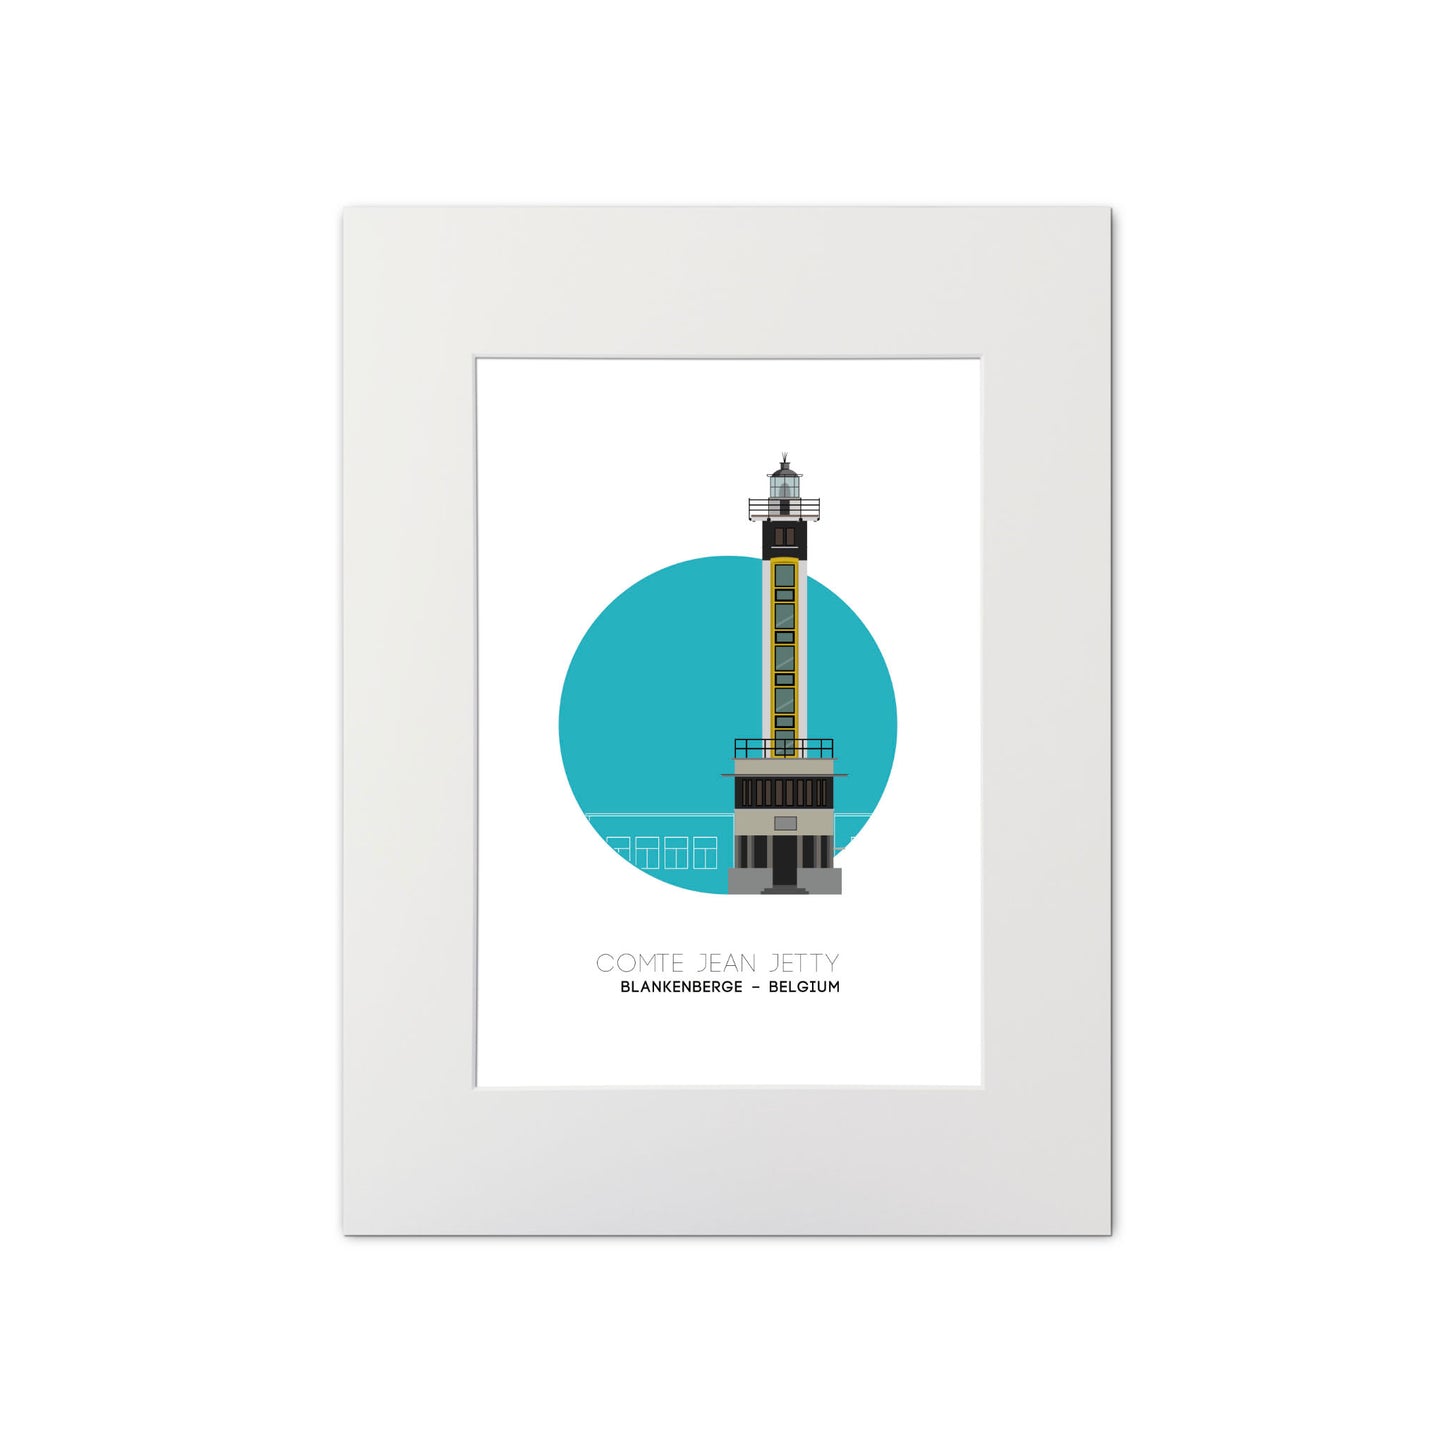 Illustration of the Compte Jean Jetty lighthouse, Blankenberge Belgium. On a white background with aqua blue circle as a backdrop, mounted and measuring 30x40cm.